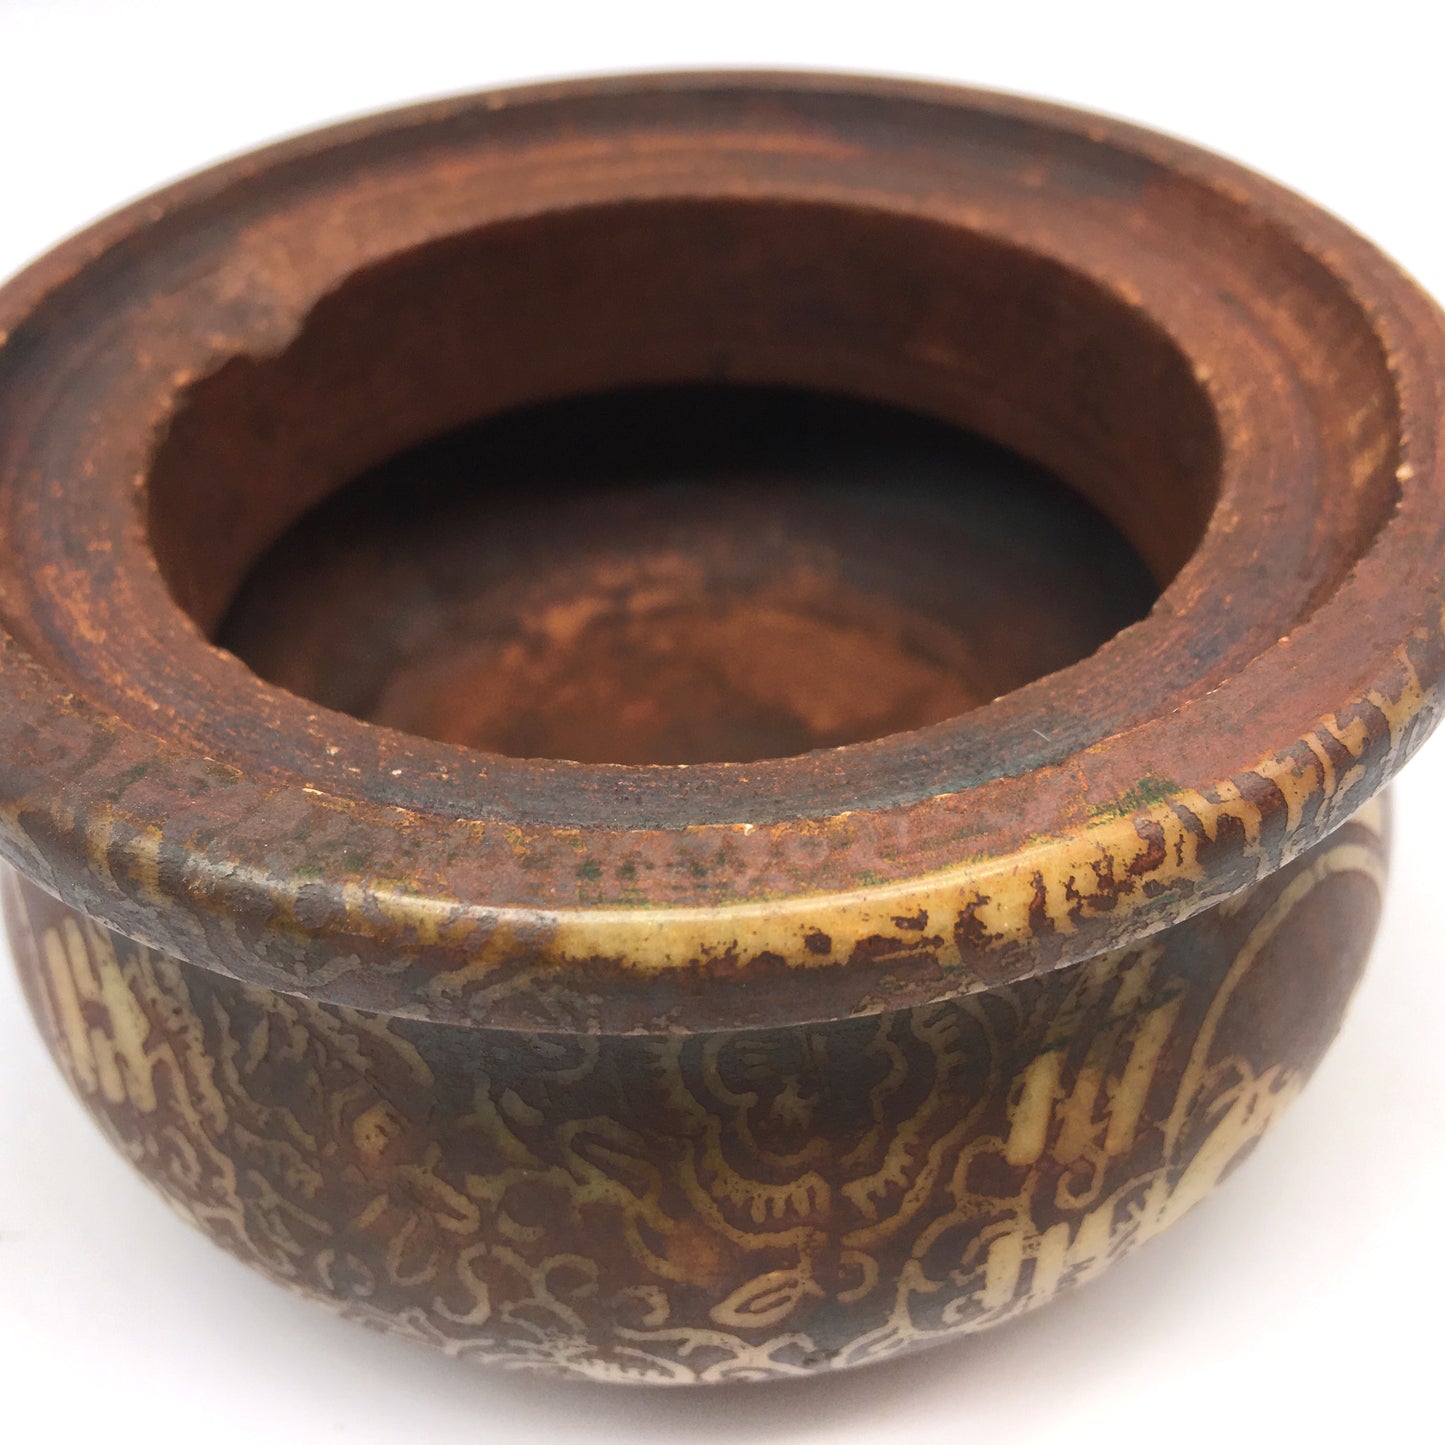 Soapstone Incense Smudging Jade Pot Bowl Natural Henna Colors- Eastern Style